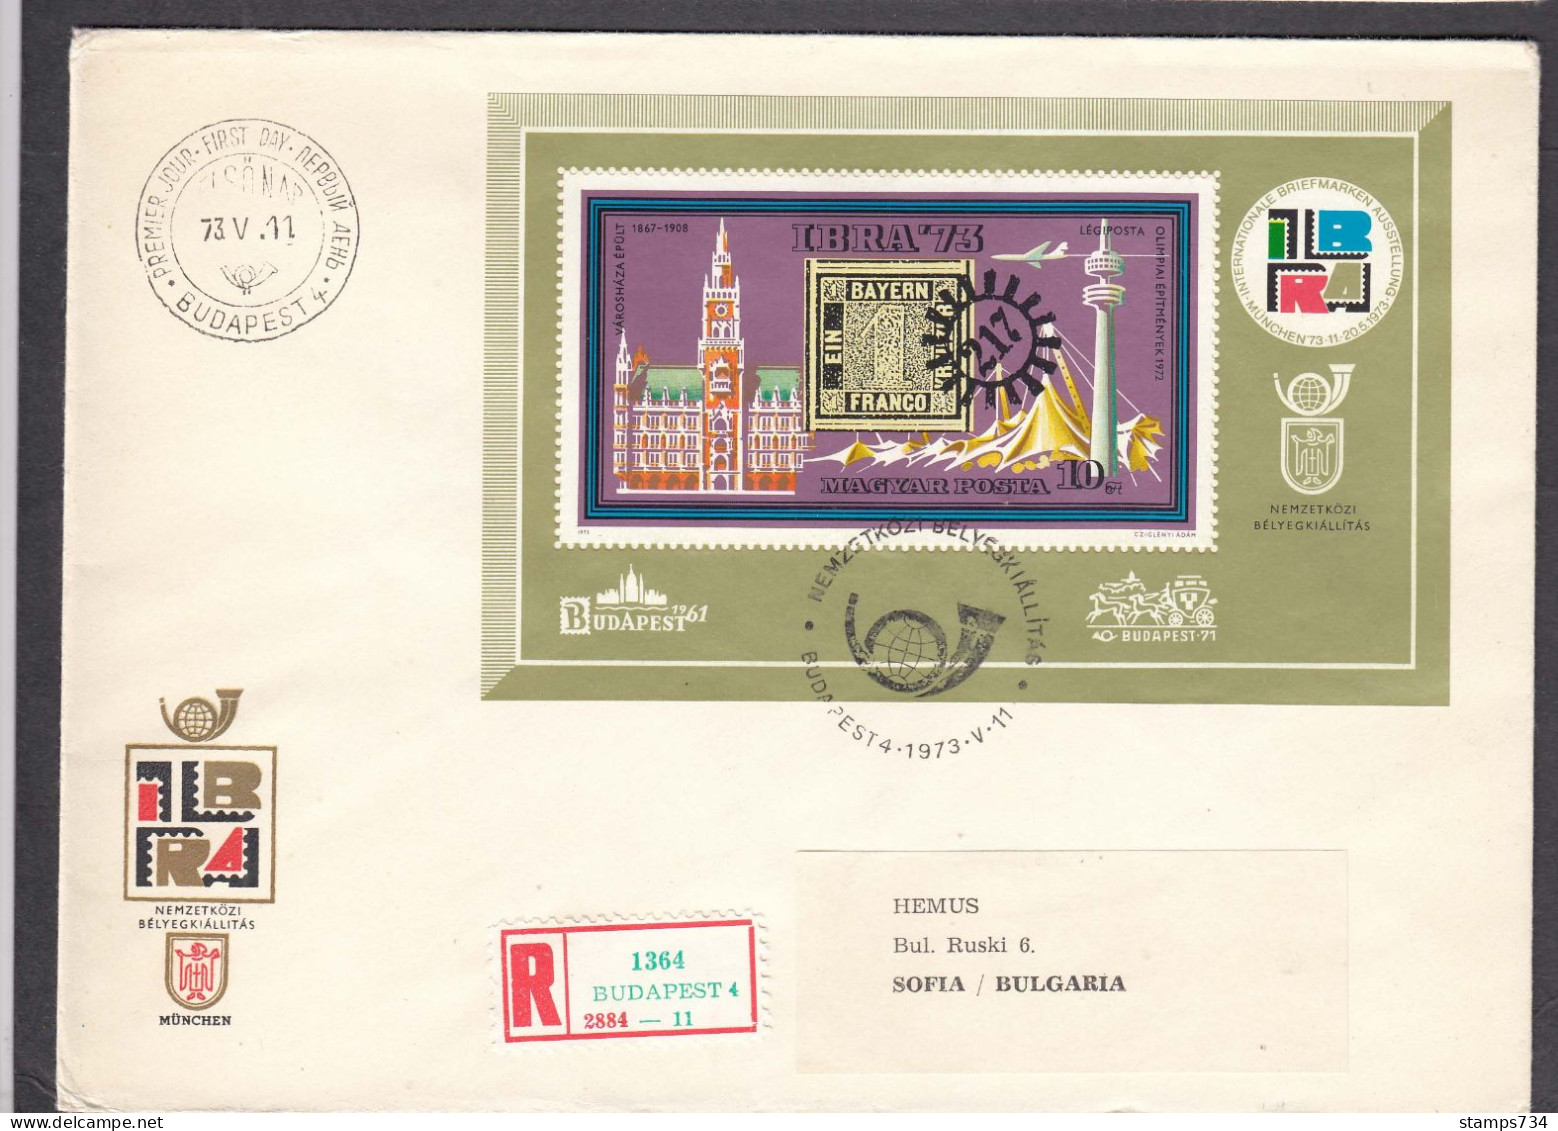 Hungary 1973 - Stamps Exhibition IBRA'73, Mi-Nr. Block 97, FDC - FDC